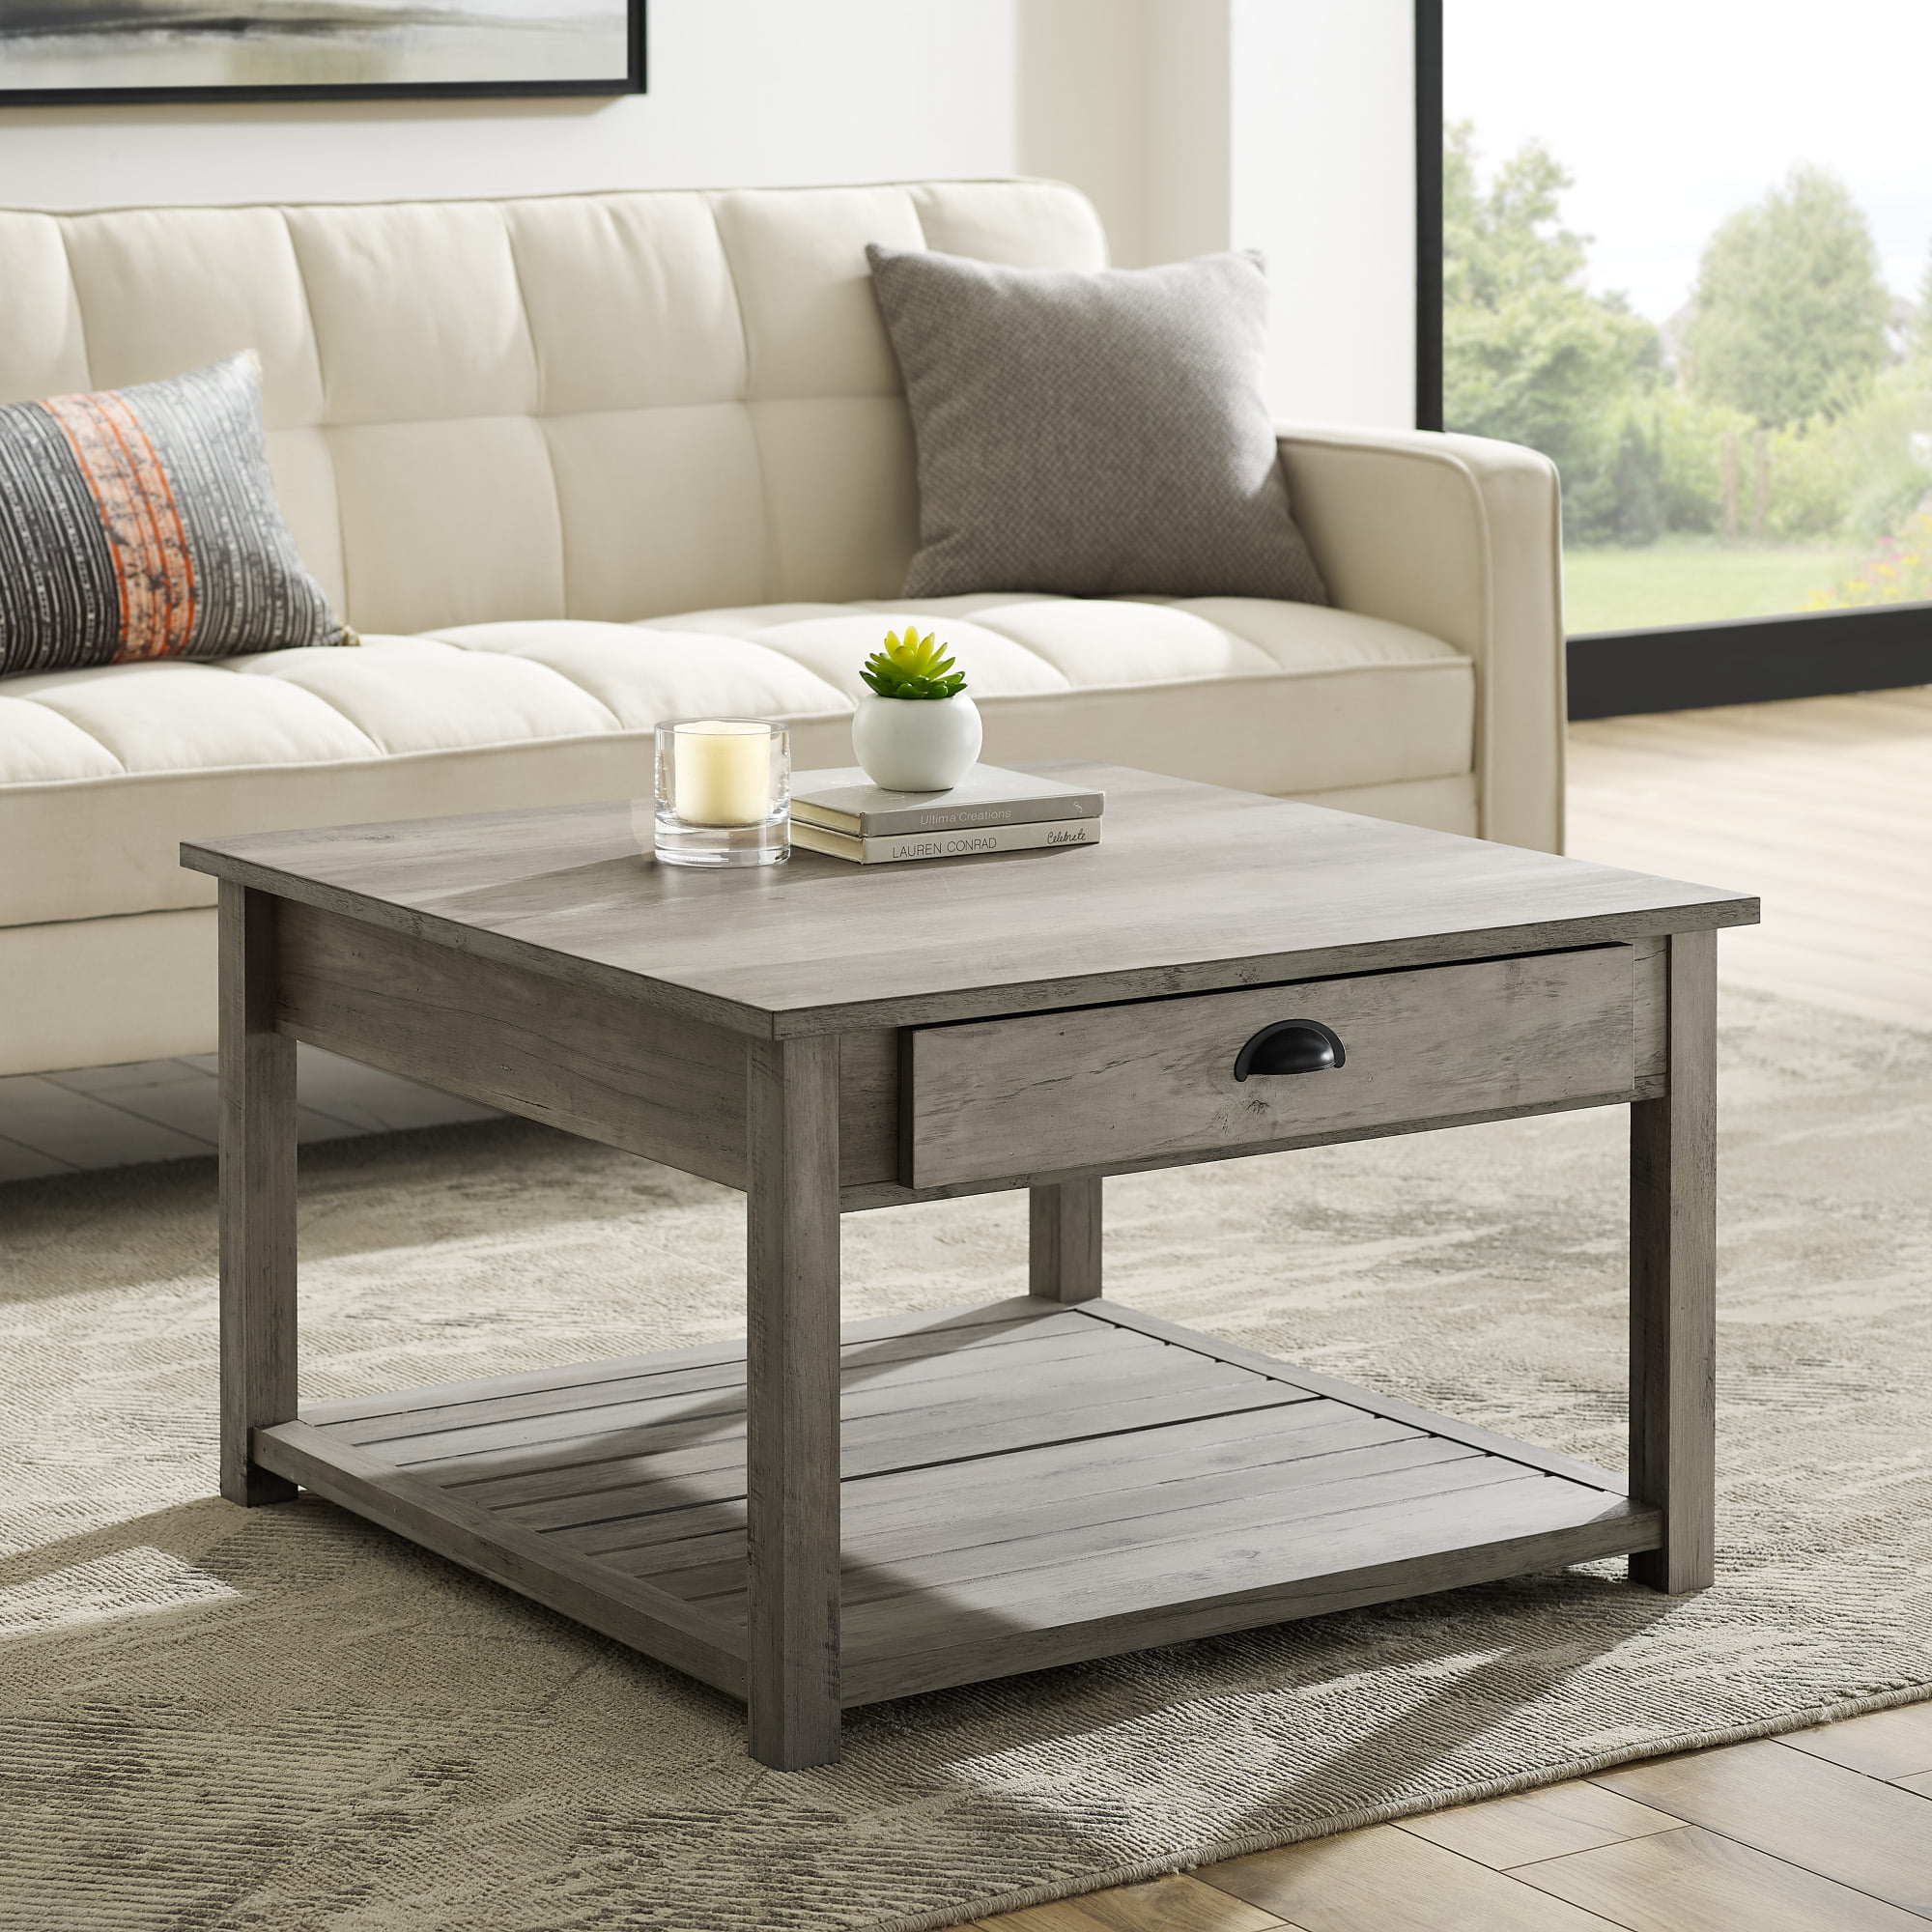 Manor Park 30 inch Square Country Coffee Table, Grey Wash - Walmart.com ...